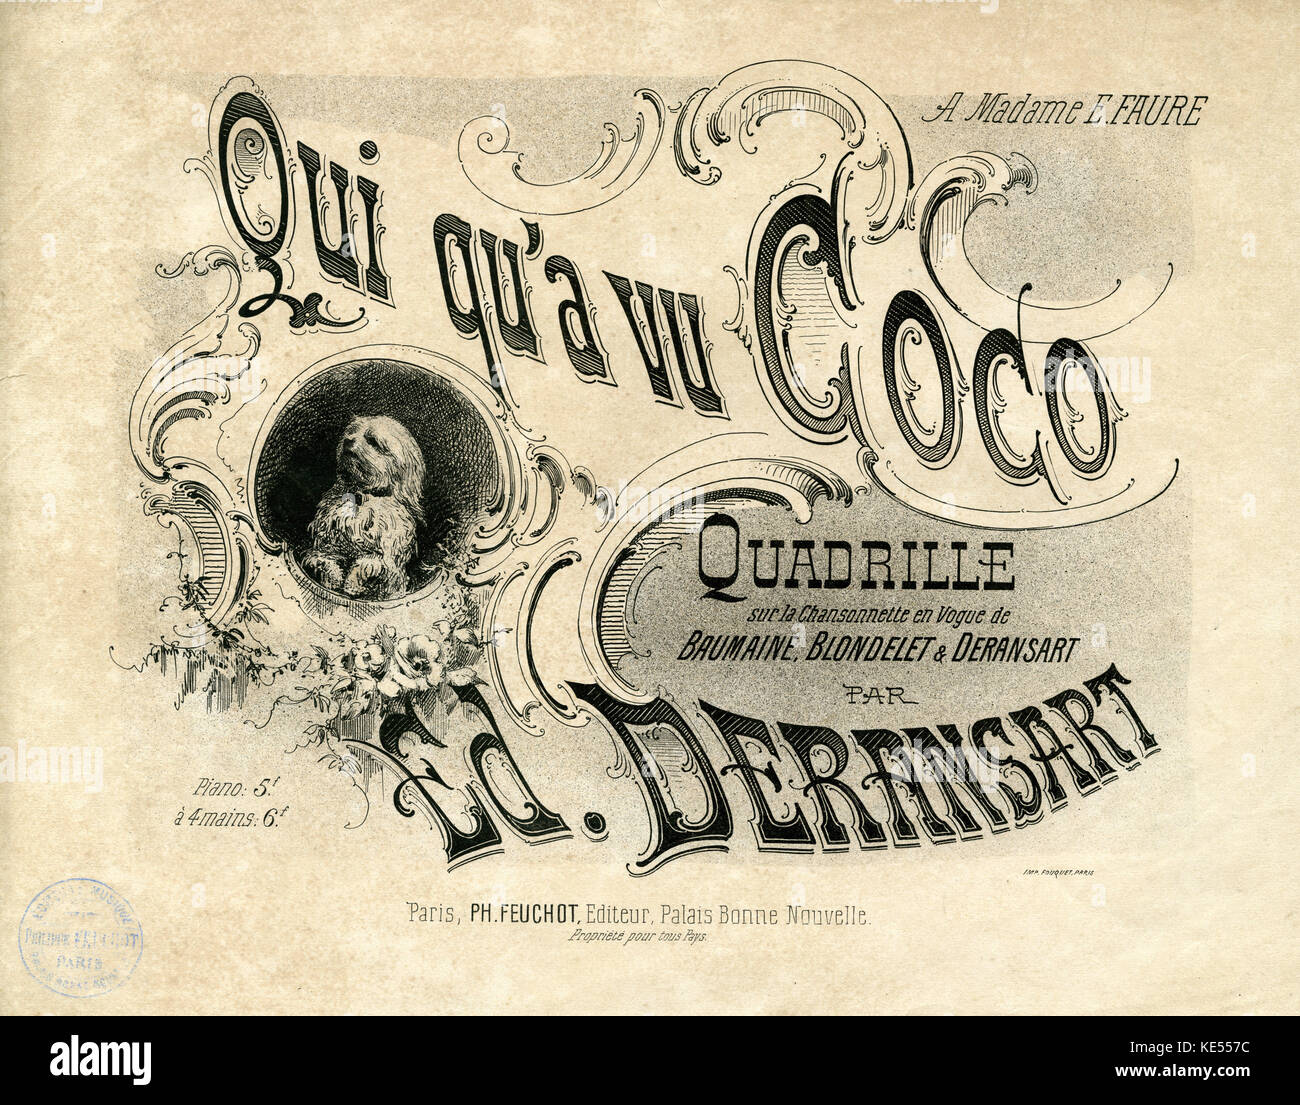 Qui qu'a vue Coco, score cover -  quadrille sur la Chansonenette en vogue de words by  Baumaine, Blondelet & music composed by Deransart by Deransart.  Published Paris, Feuchot.  Song by Coco Chanel, as a result she took on the name Coco. Coco Chanel (originally called Gabrielle Chasnel),  : French fashion designer,  19 August 1883 – 10 January 1971. Stock Photo